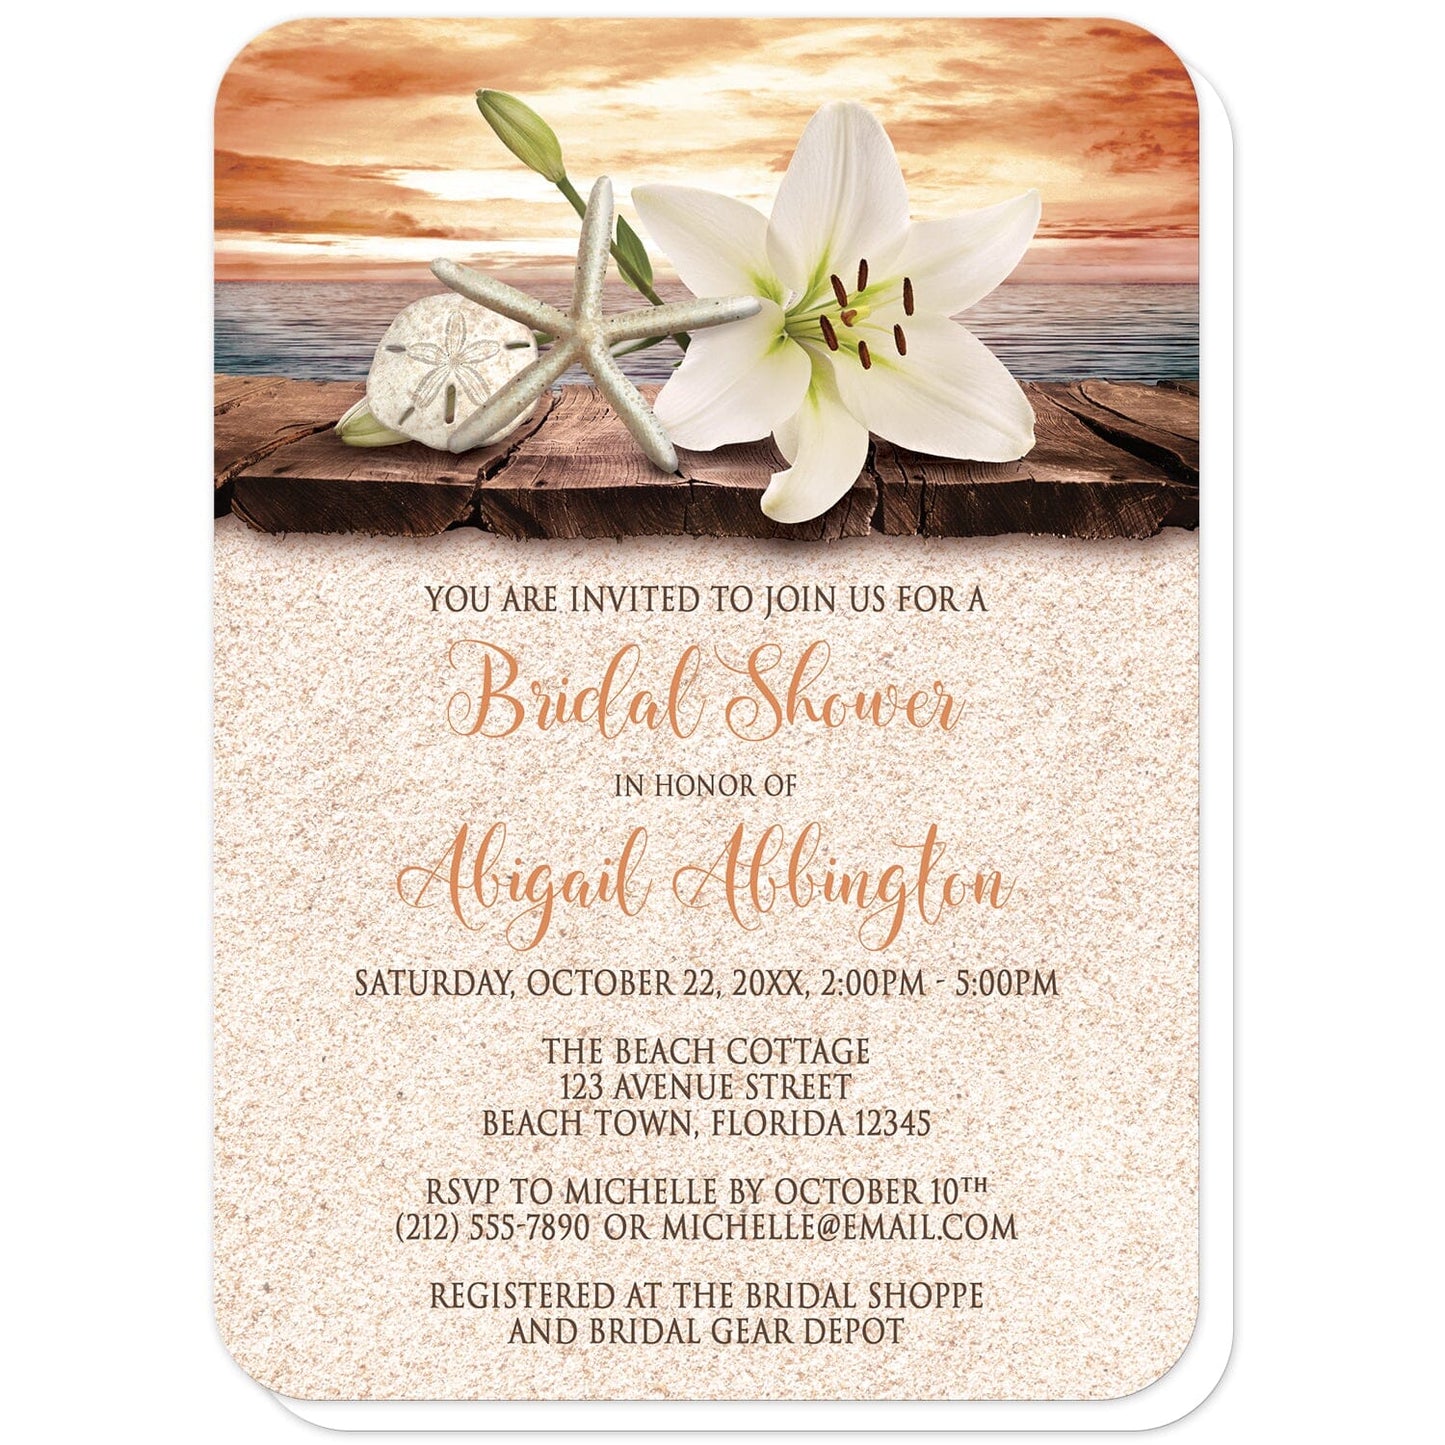 Lily Seashells and Sand Autumn Beach Bridal Shower Invitations (with rounded corners) at Artistically Invited. Lily seashells and sand autumn beach bridal shower invitations with an elegant white lily, a starfish, and a sand dollar on a rustic wood dock overlooking the open water under an orange sunset sky. Your personalized bridal shower celebration details are custom printed in dark brown and orange over a beige sand background design. 